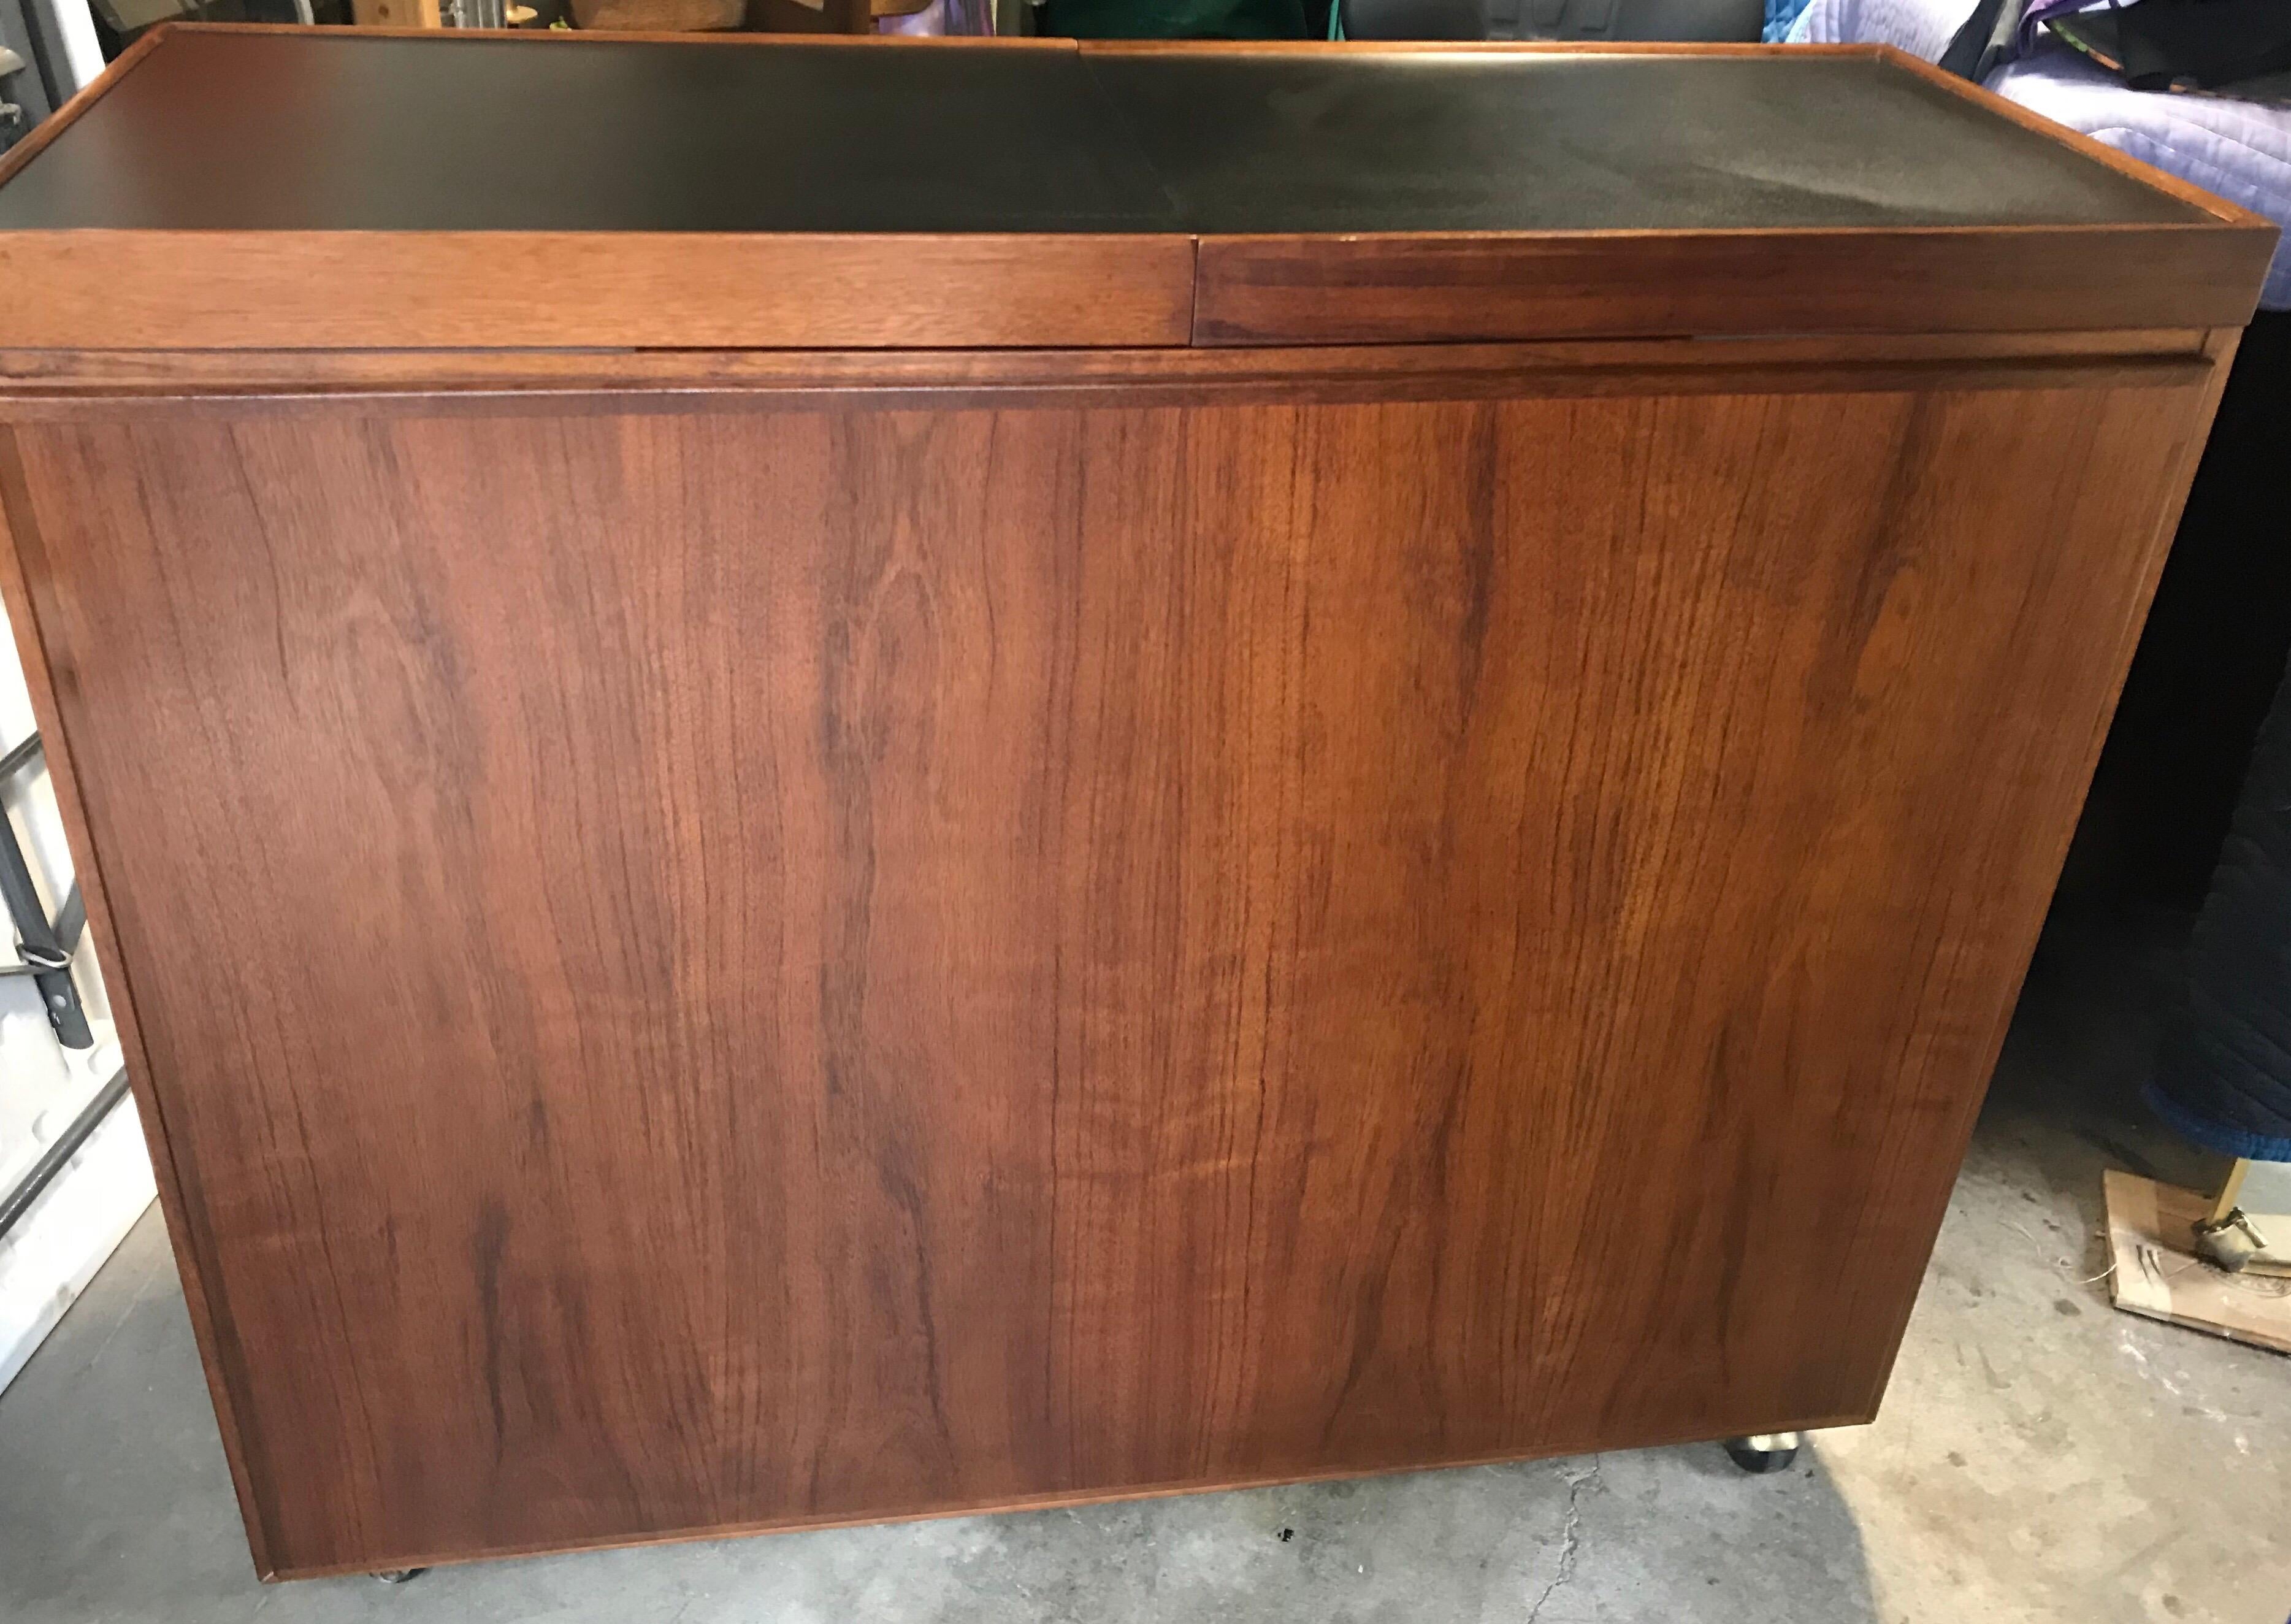 American Mid Century Rosewood Cocktail Bar by Jack Cartwright for Founders Furniture Co.